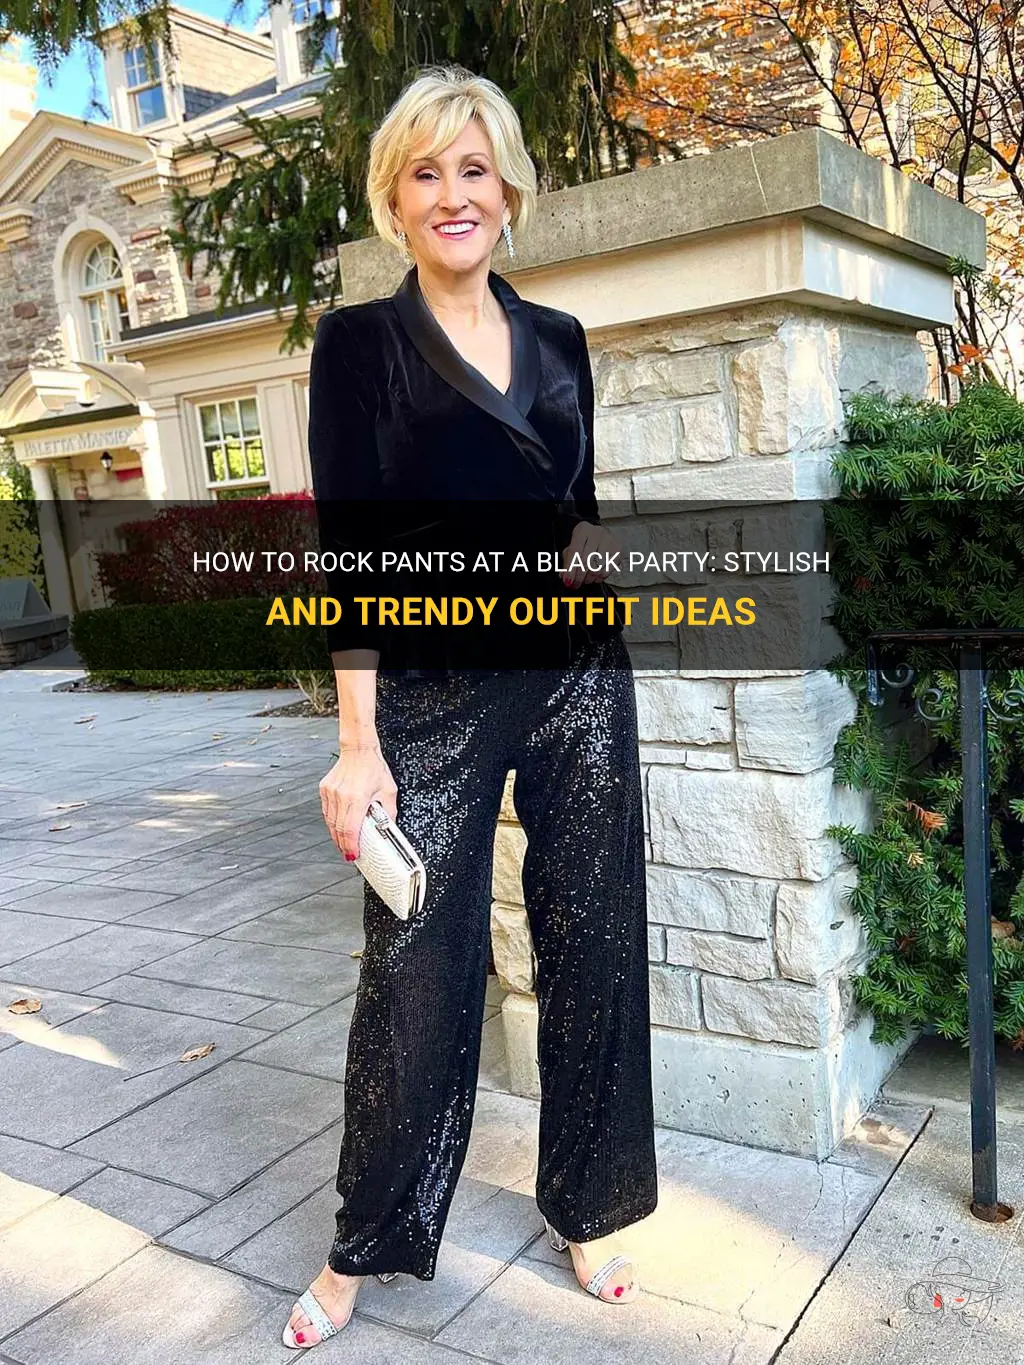 How To Rock Pants At A Black Party: Stylish And Trendy Outfit Ideas ...